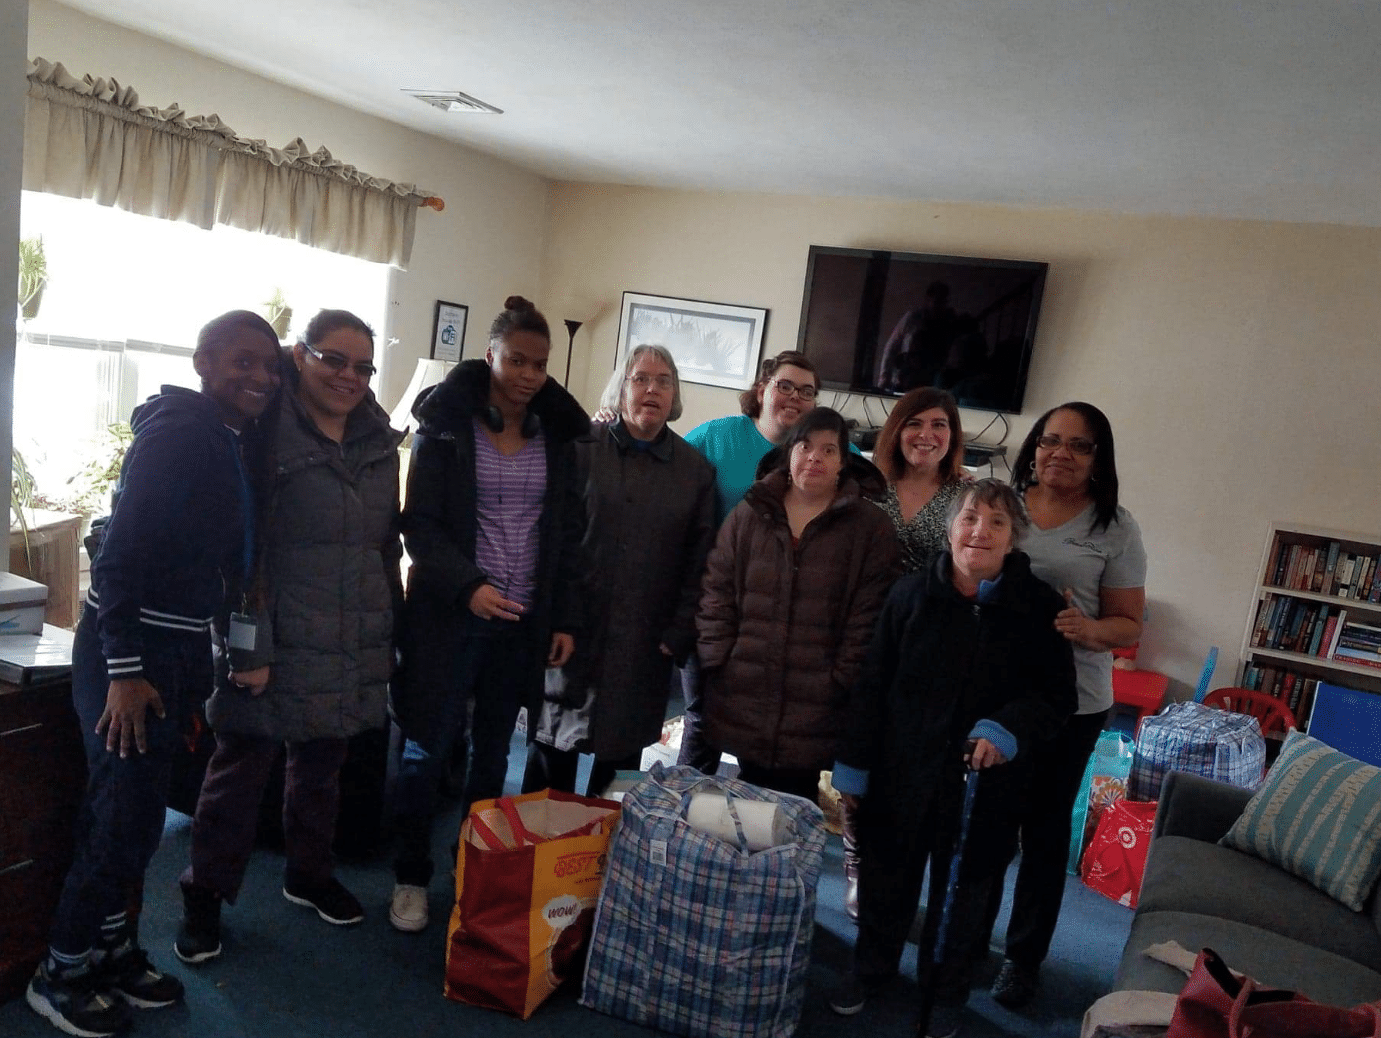 Amanda Brosnan gathers with AHRC Nassau staff and Bethany House staff members for a photo with donations